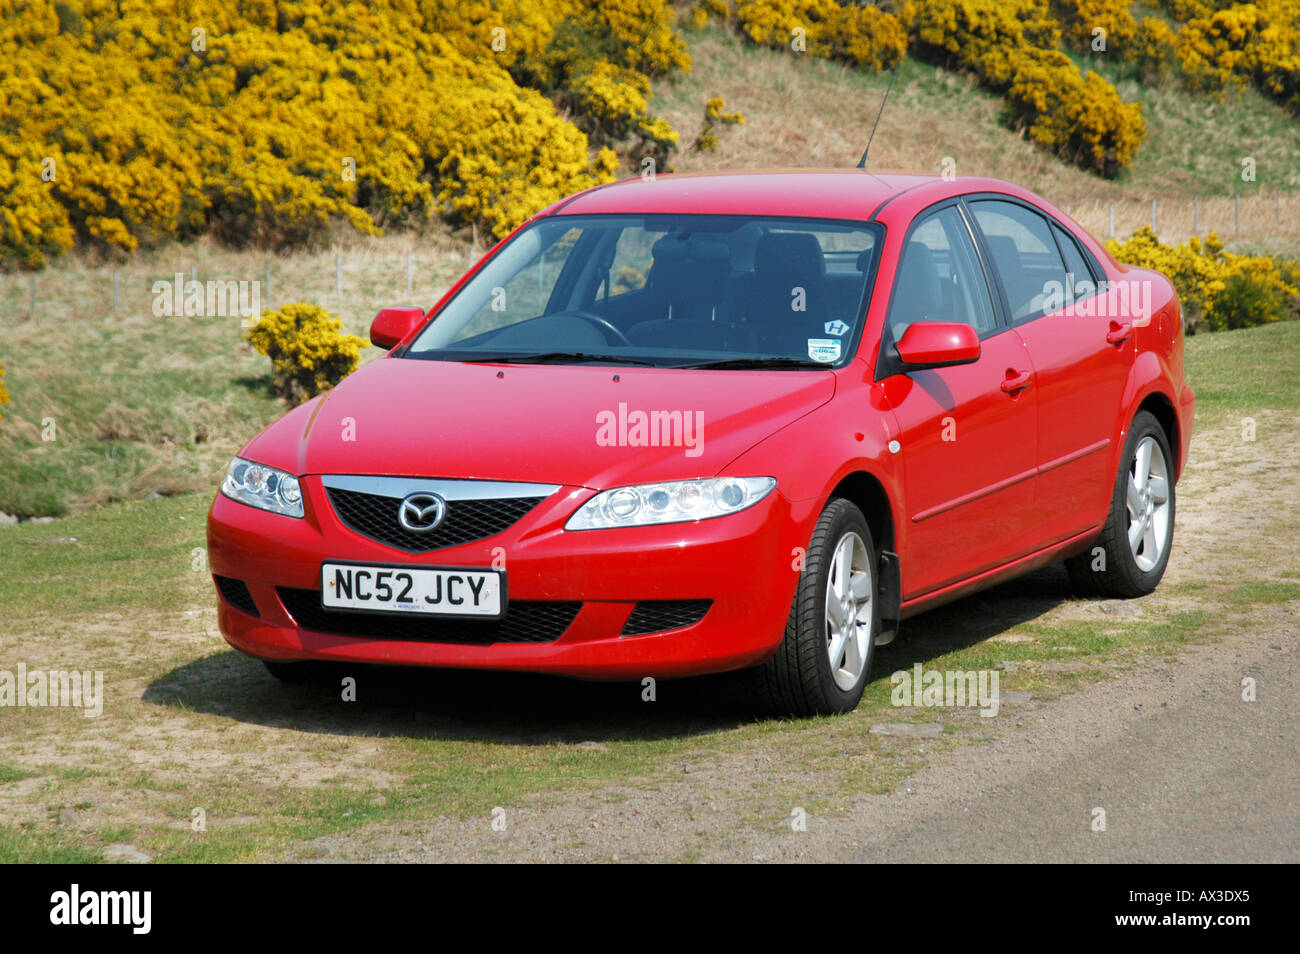 Red Mazda 6 saloon car parked at the side of the road in the countryside in the UK. Stock Photo